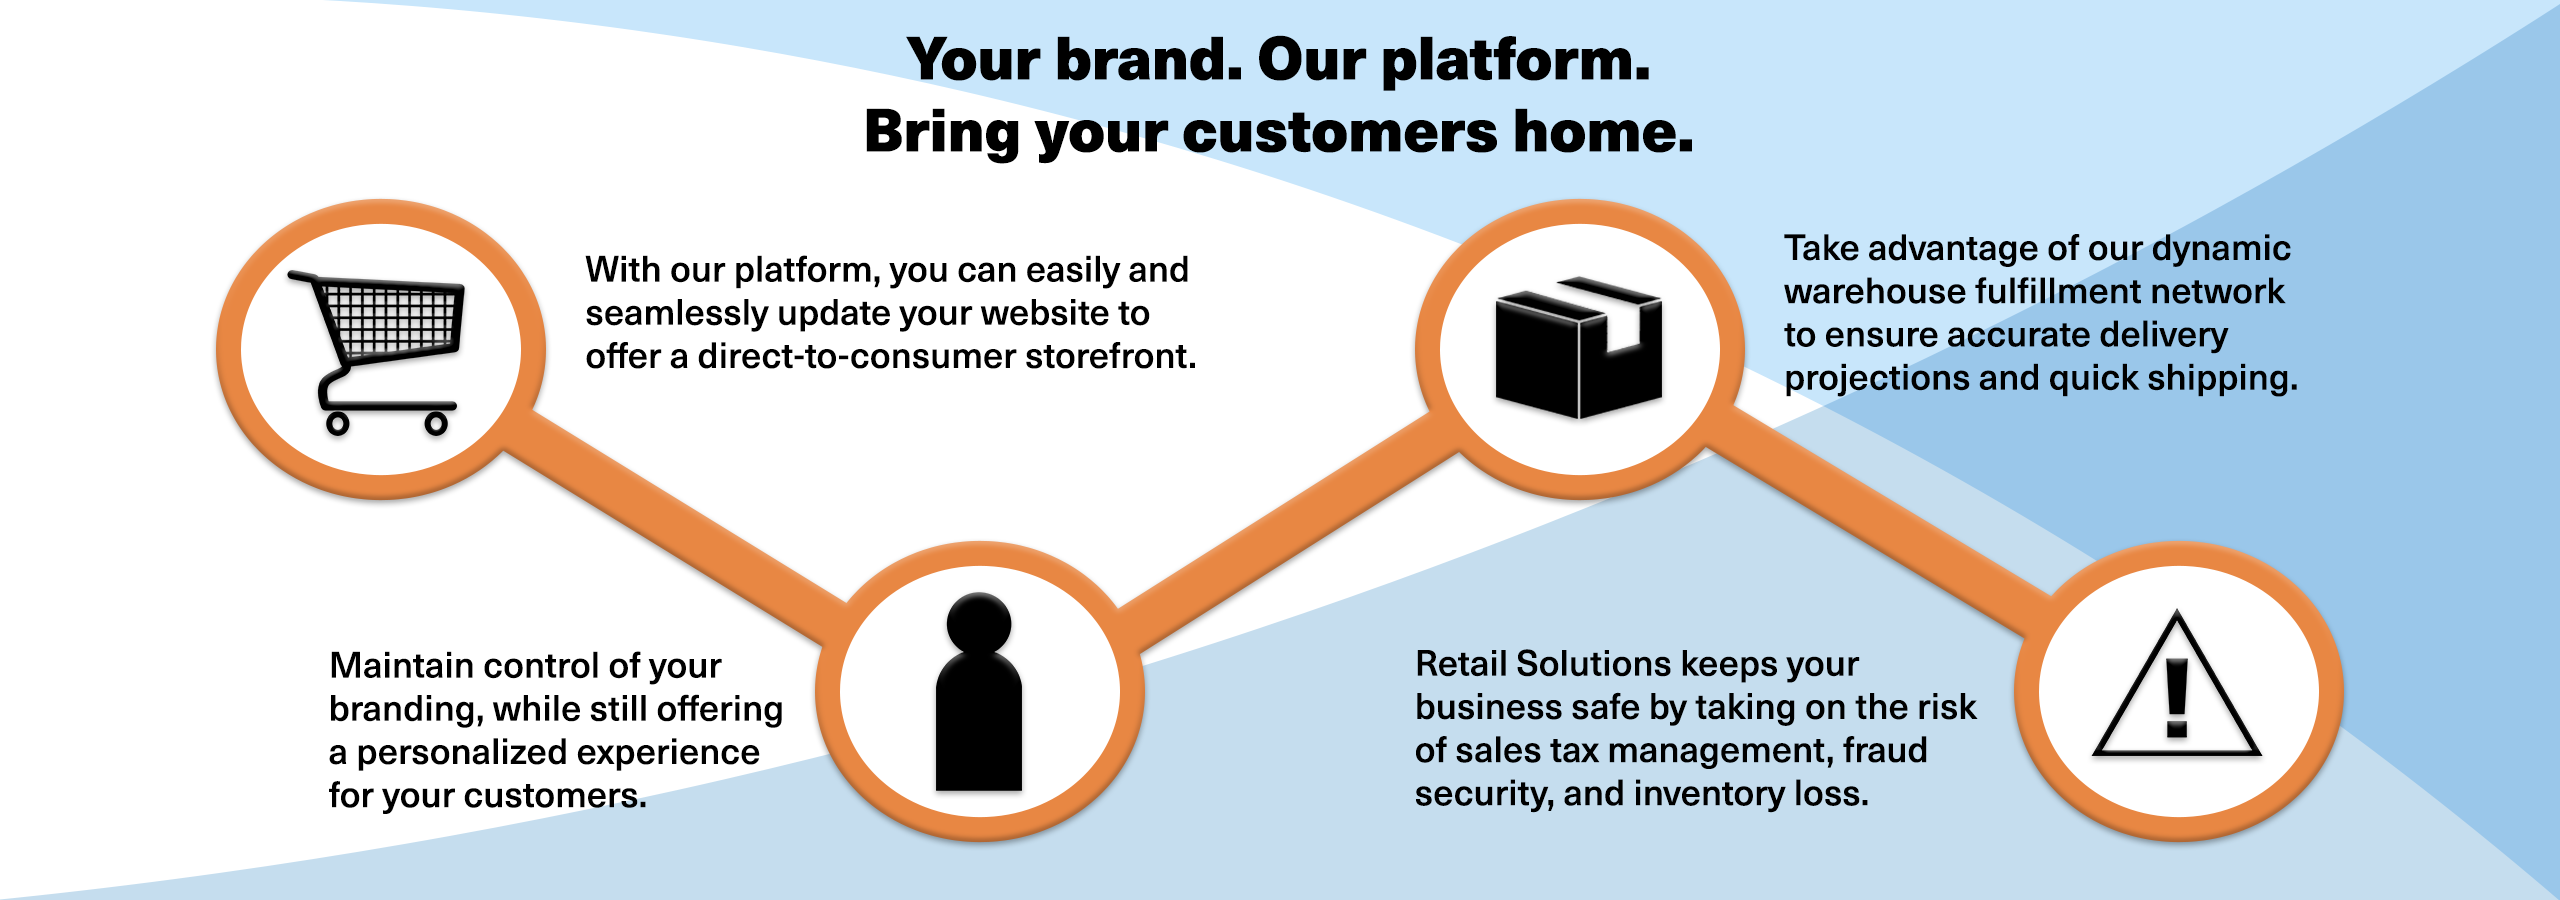 With our platform you can: easily update your website to offer a direct to consumer storefront, maintain control of your branding, take advantage of our dynamic warehouse fulfillment network, and keep your business safe from risks ranging from fraud security to inventory loss.